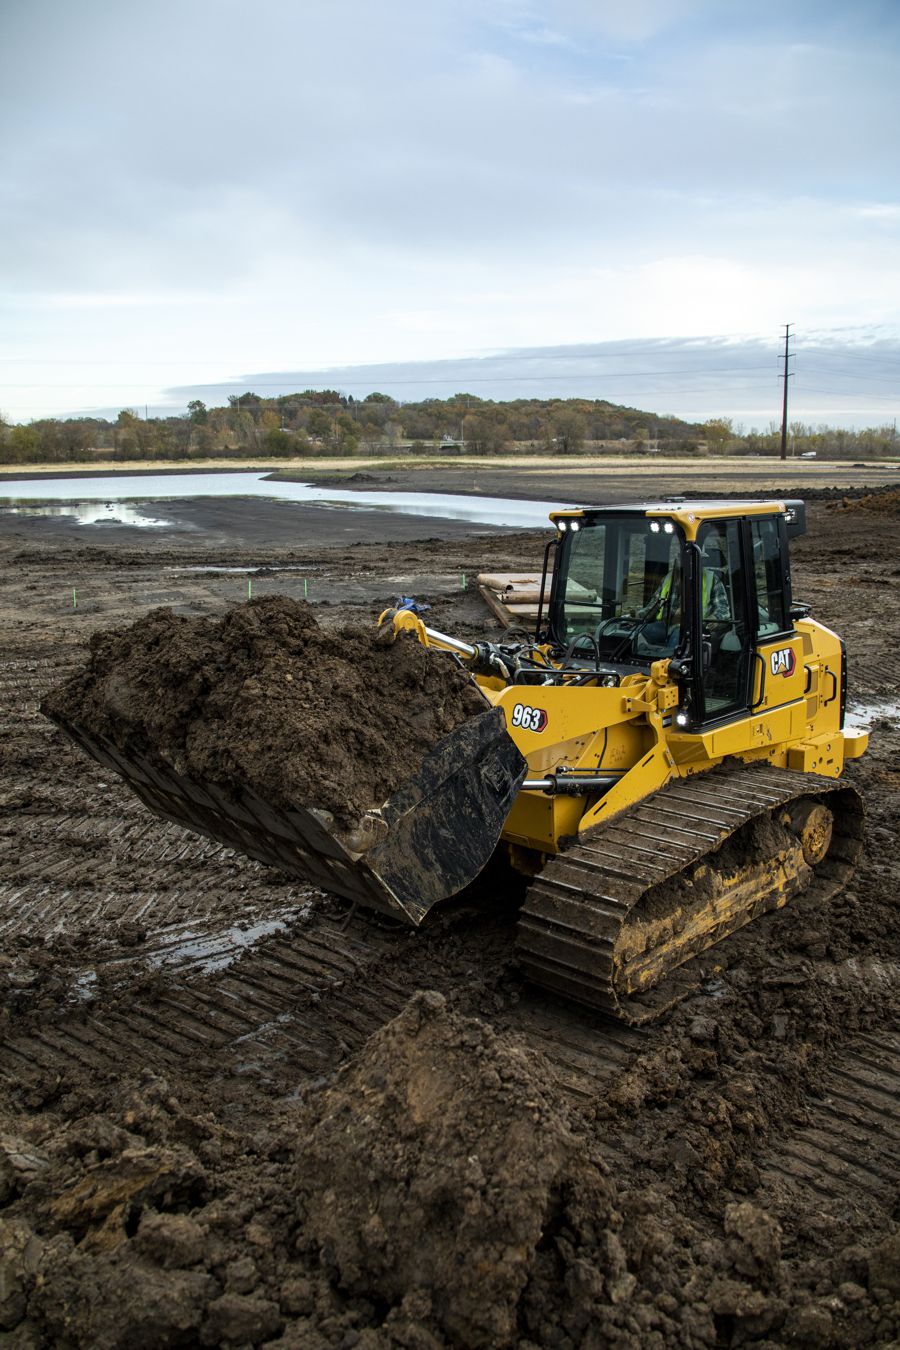 New CAT 963 Track Loader focuses on versatility and productivity